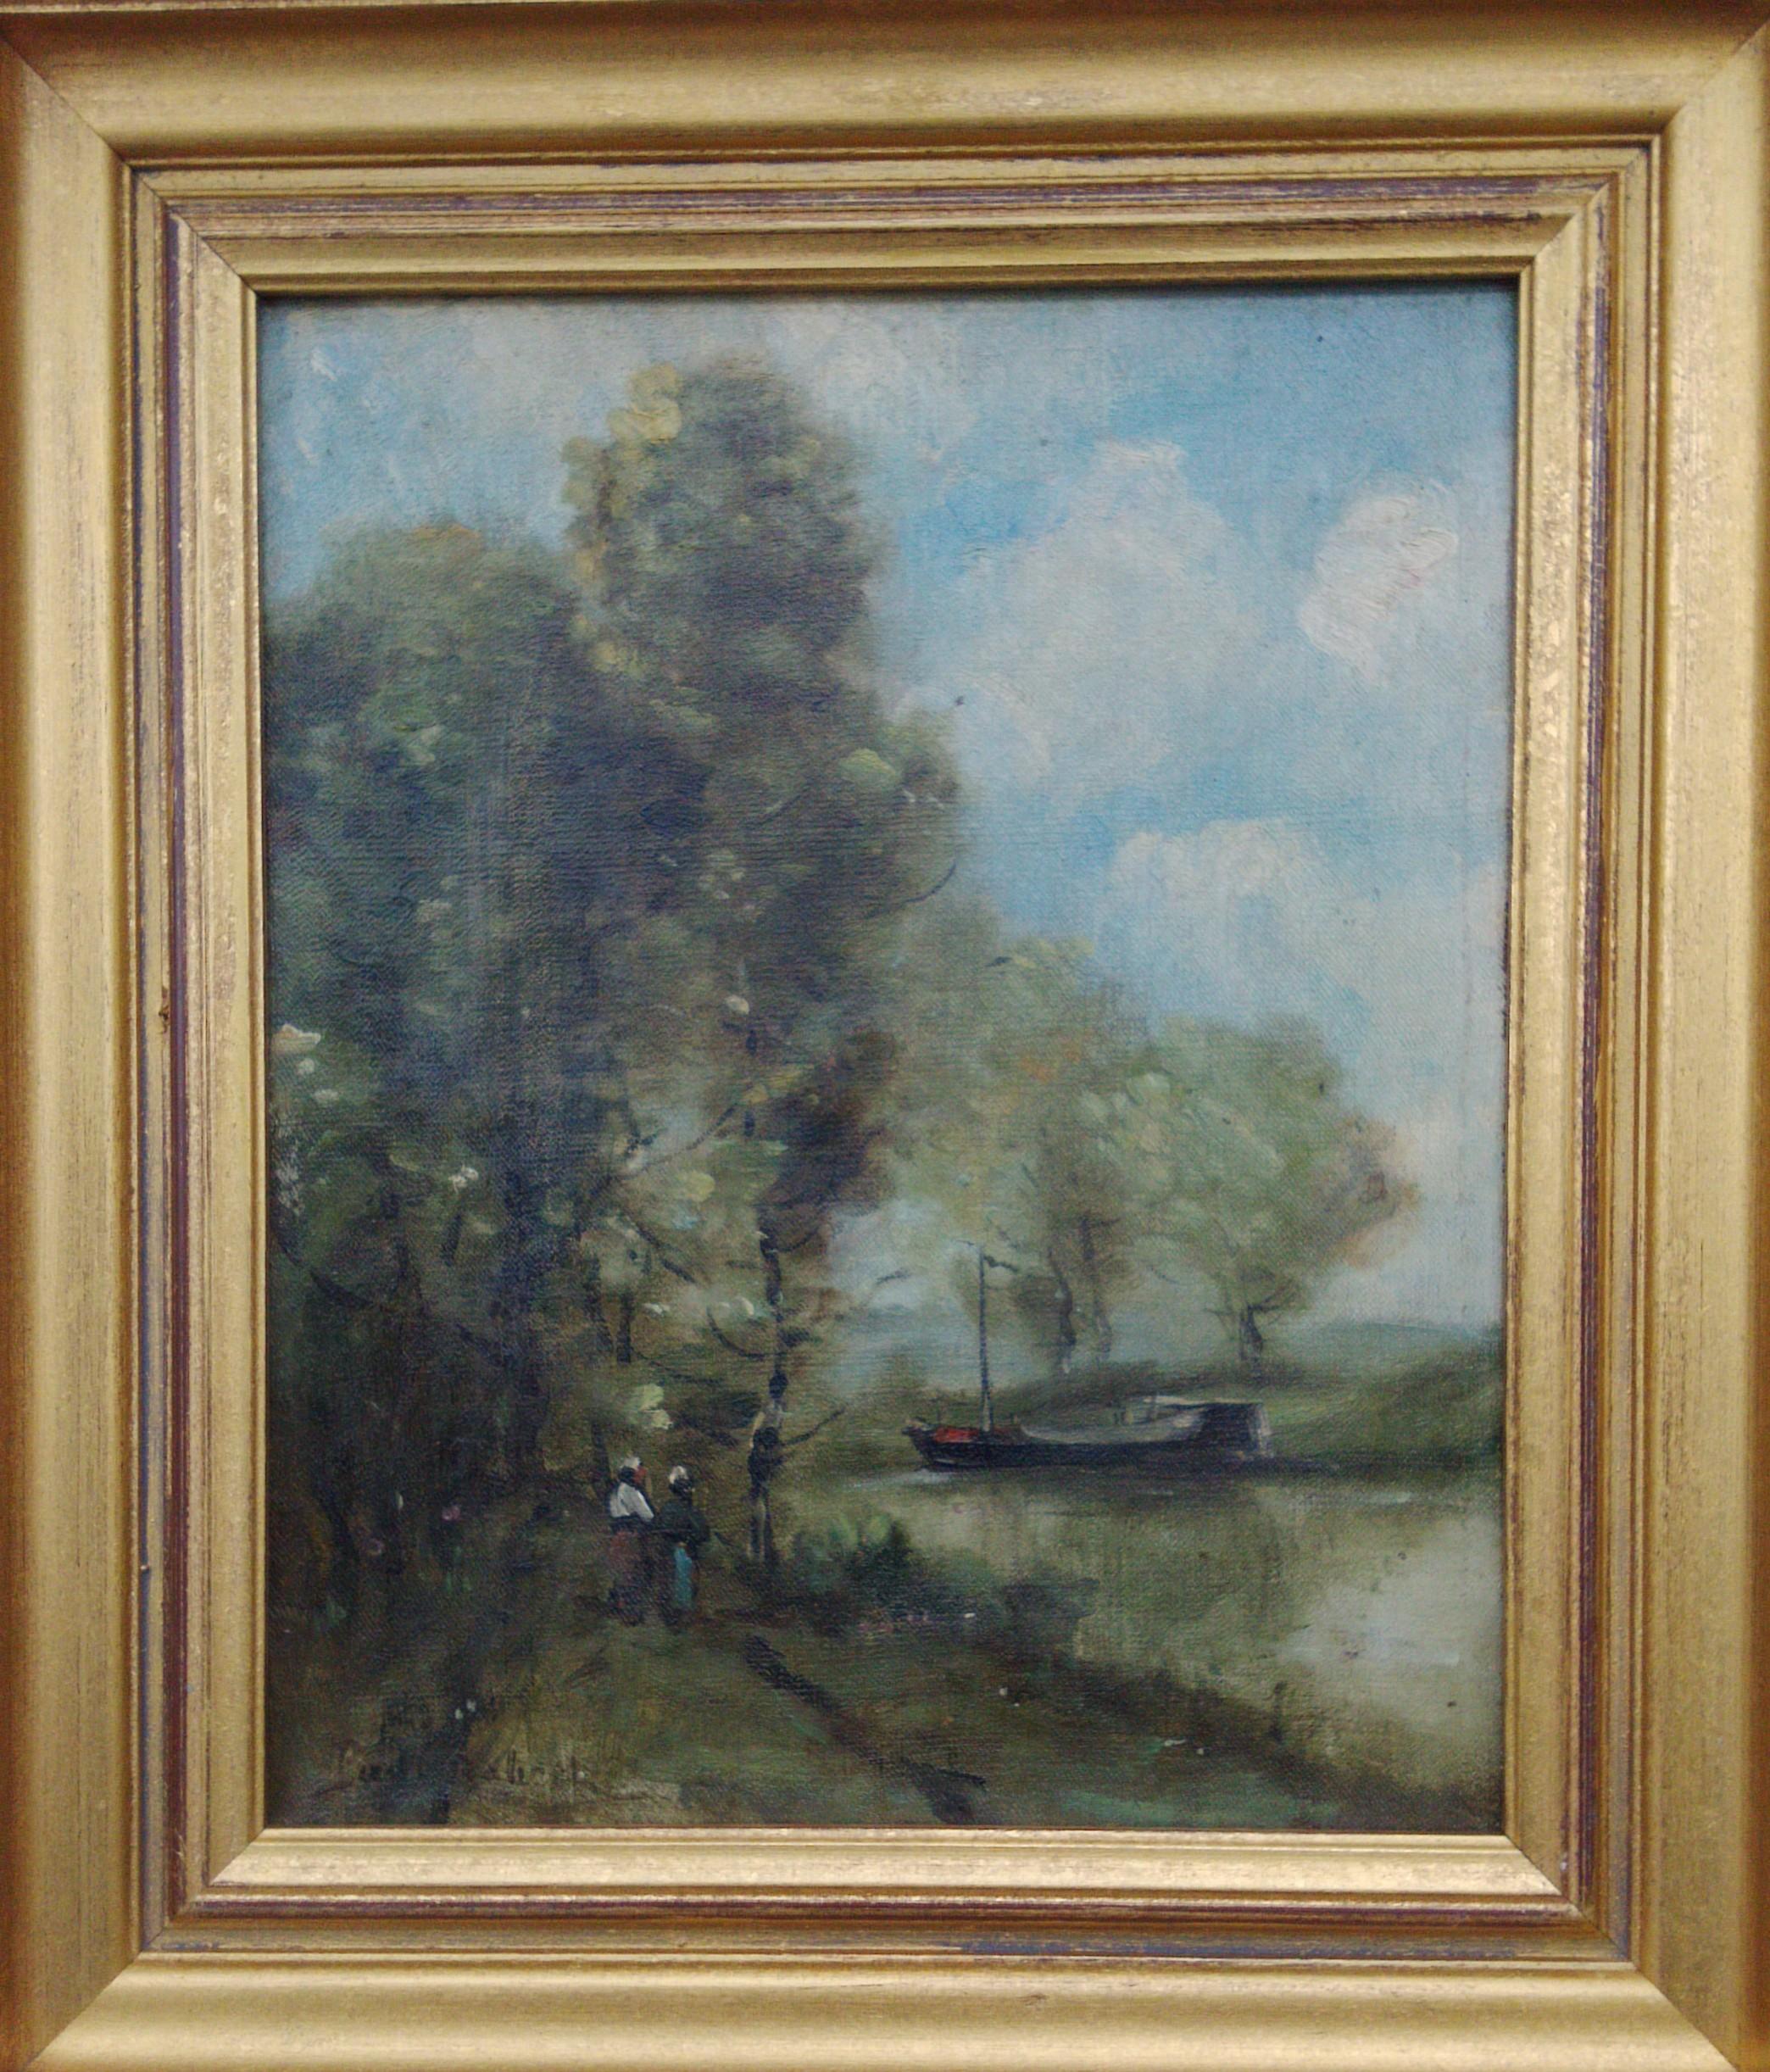 Unknown Landscape Painting - French Barbizon Landscape, Attributed to Paul Robert, Swiss 19th c.